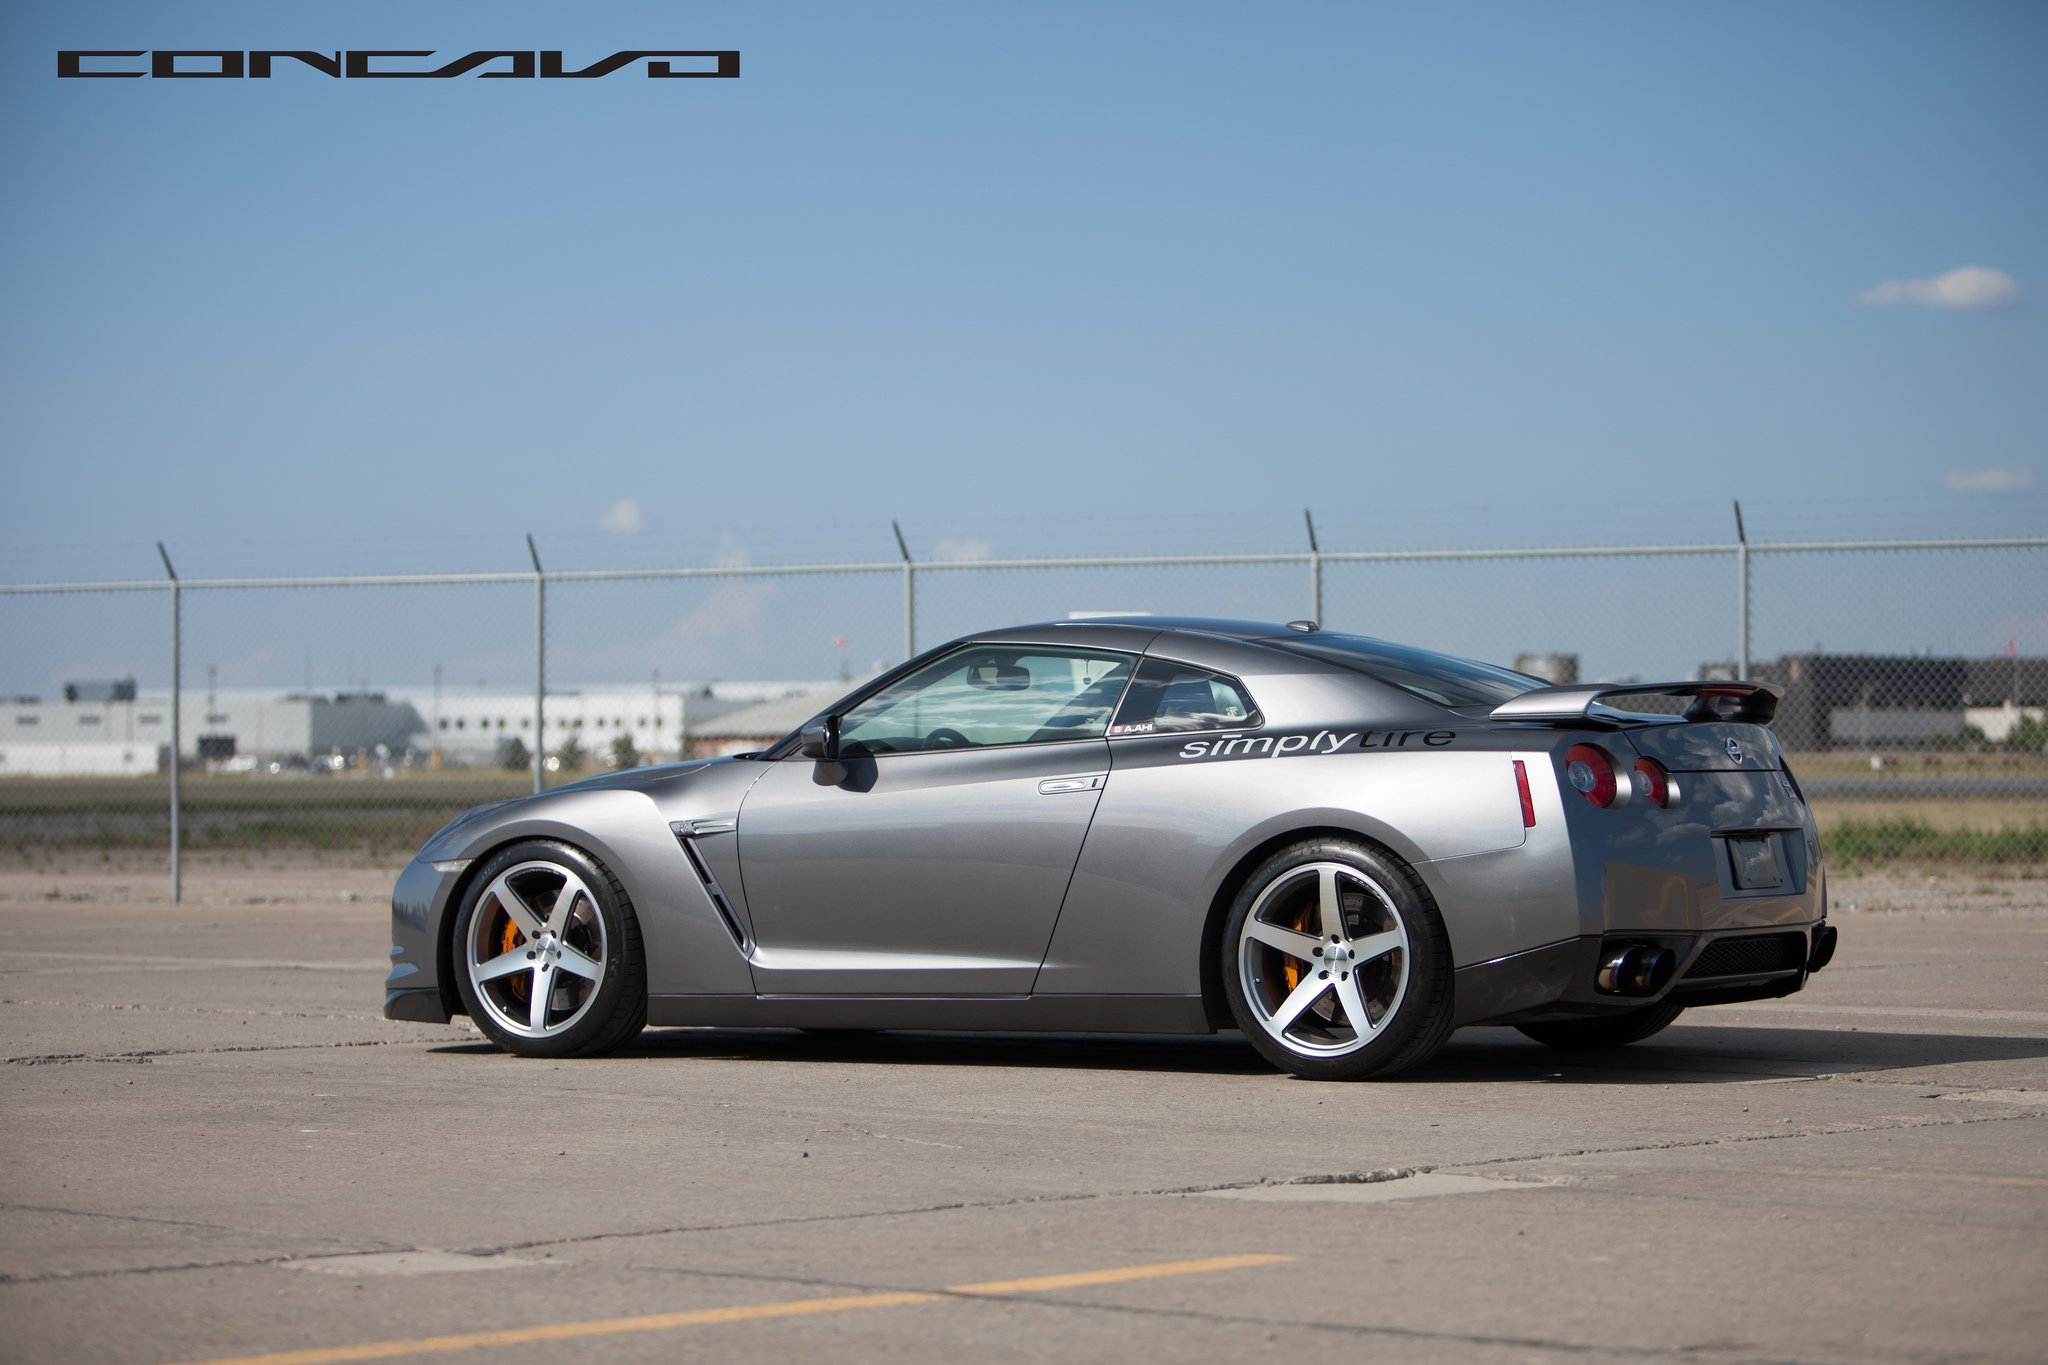 gt r, Nismo, Nissan, R35, Tuning, Supercar, Coupe, Japan, Gris, Grey Wallpaper